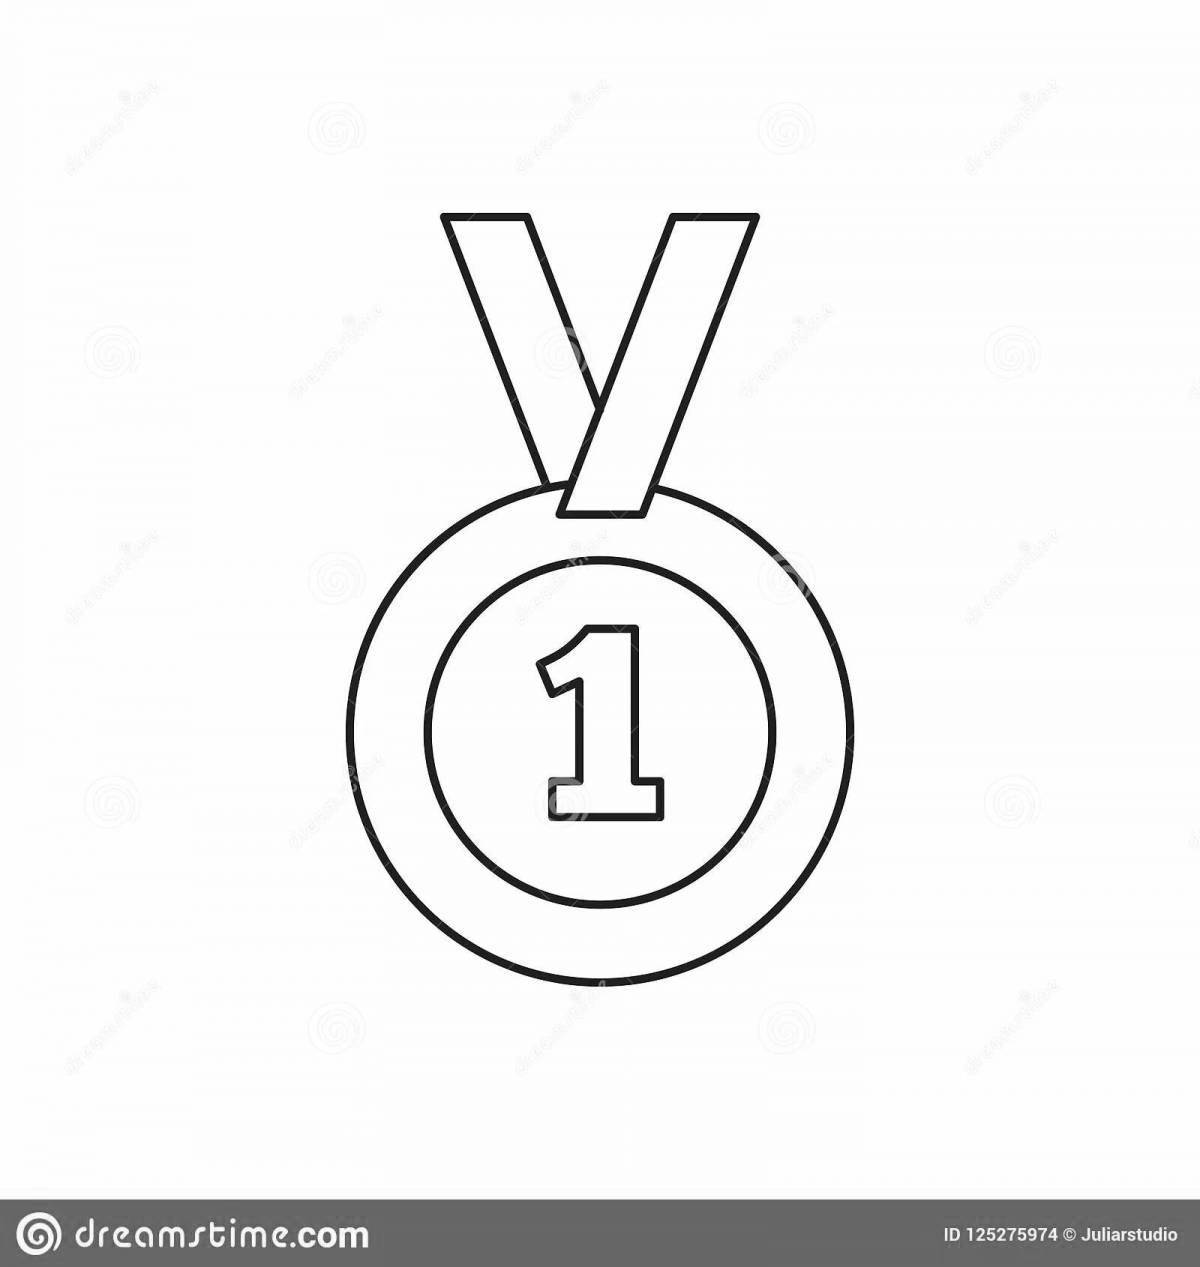 Playful medal coloring page for kids